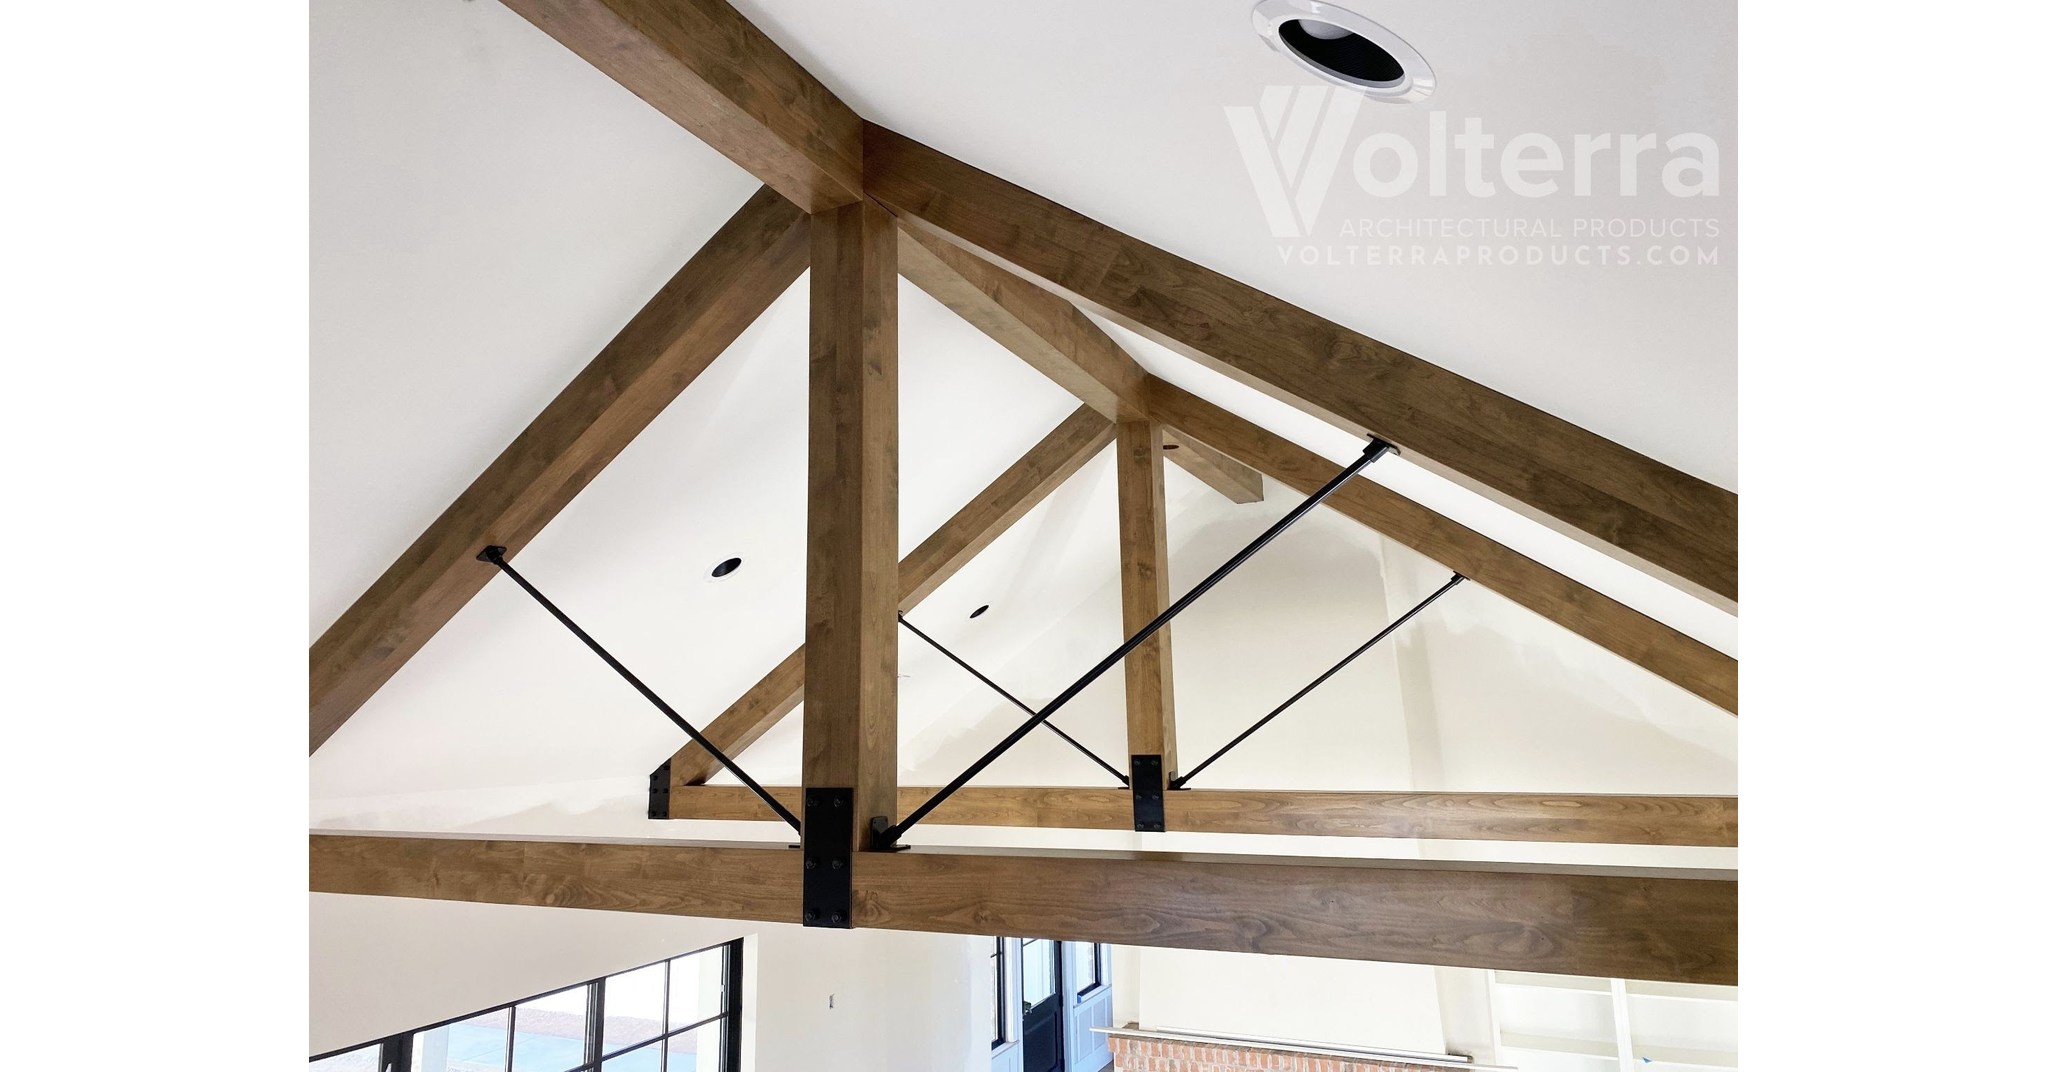 Volterra Architectural Products Launches Line of Decorative Natural Wood Ceiling Beams